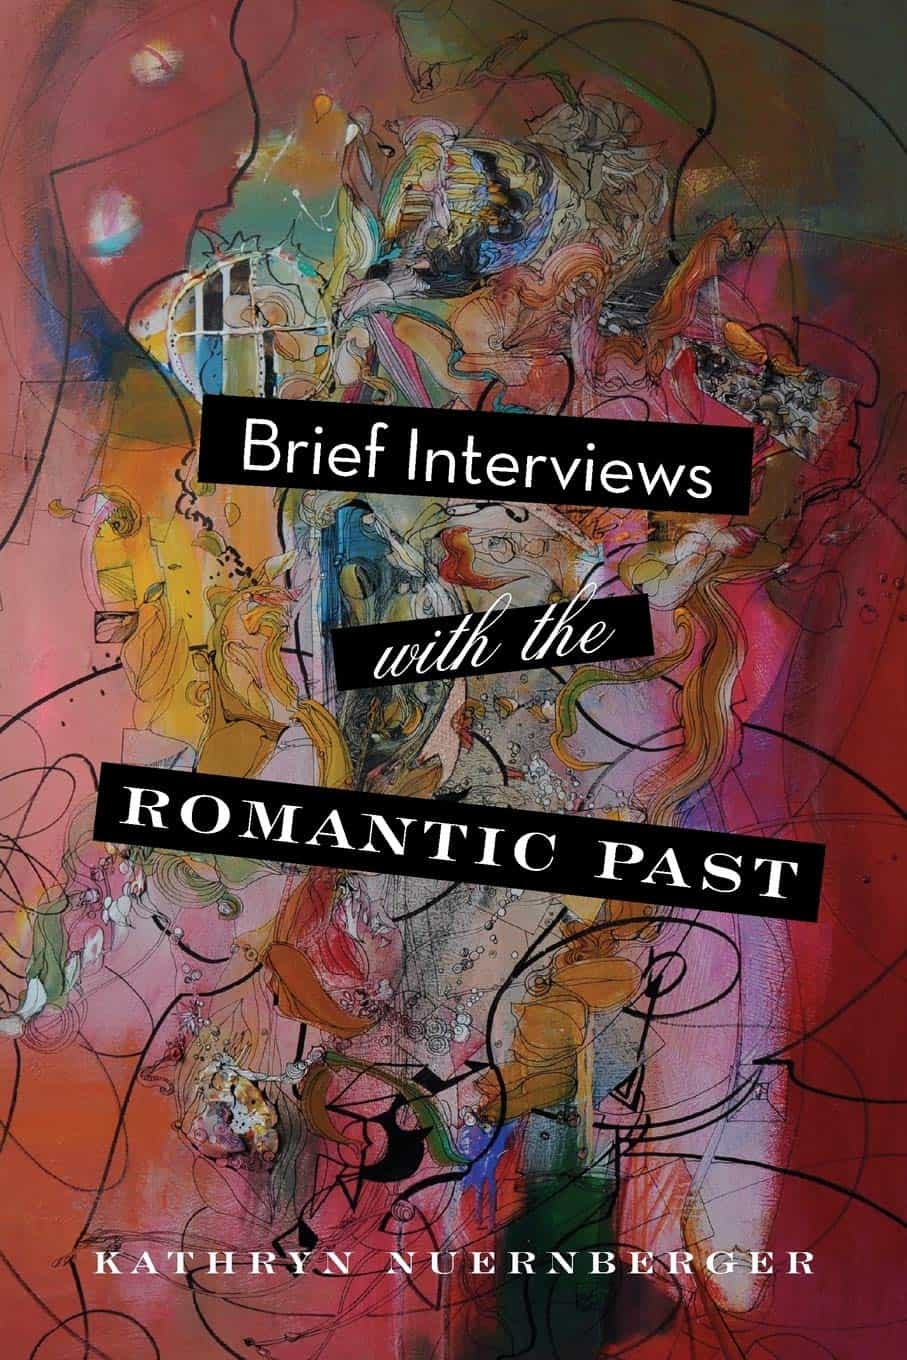 Cover of the Katheryn Nuernberger book "Brief Interviews with the Romantic Past"